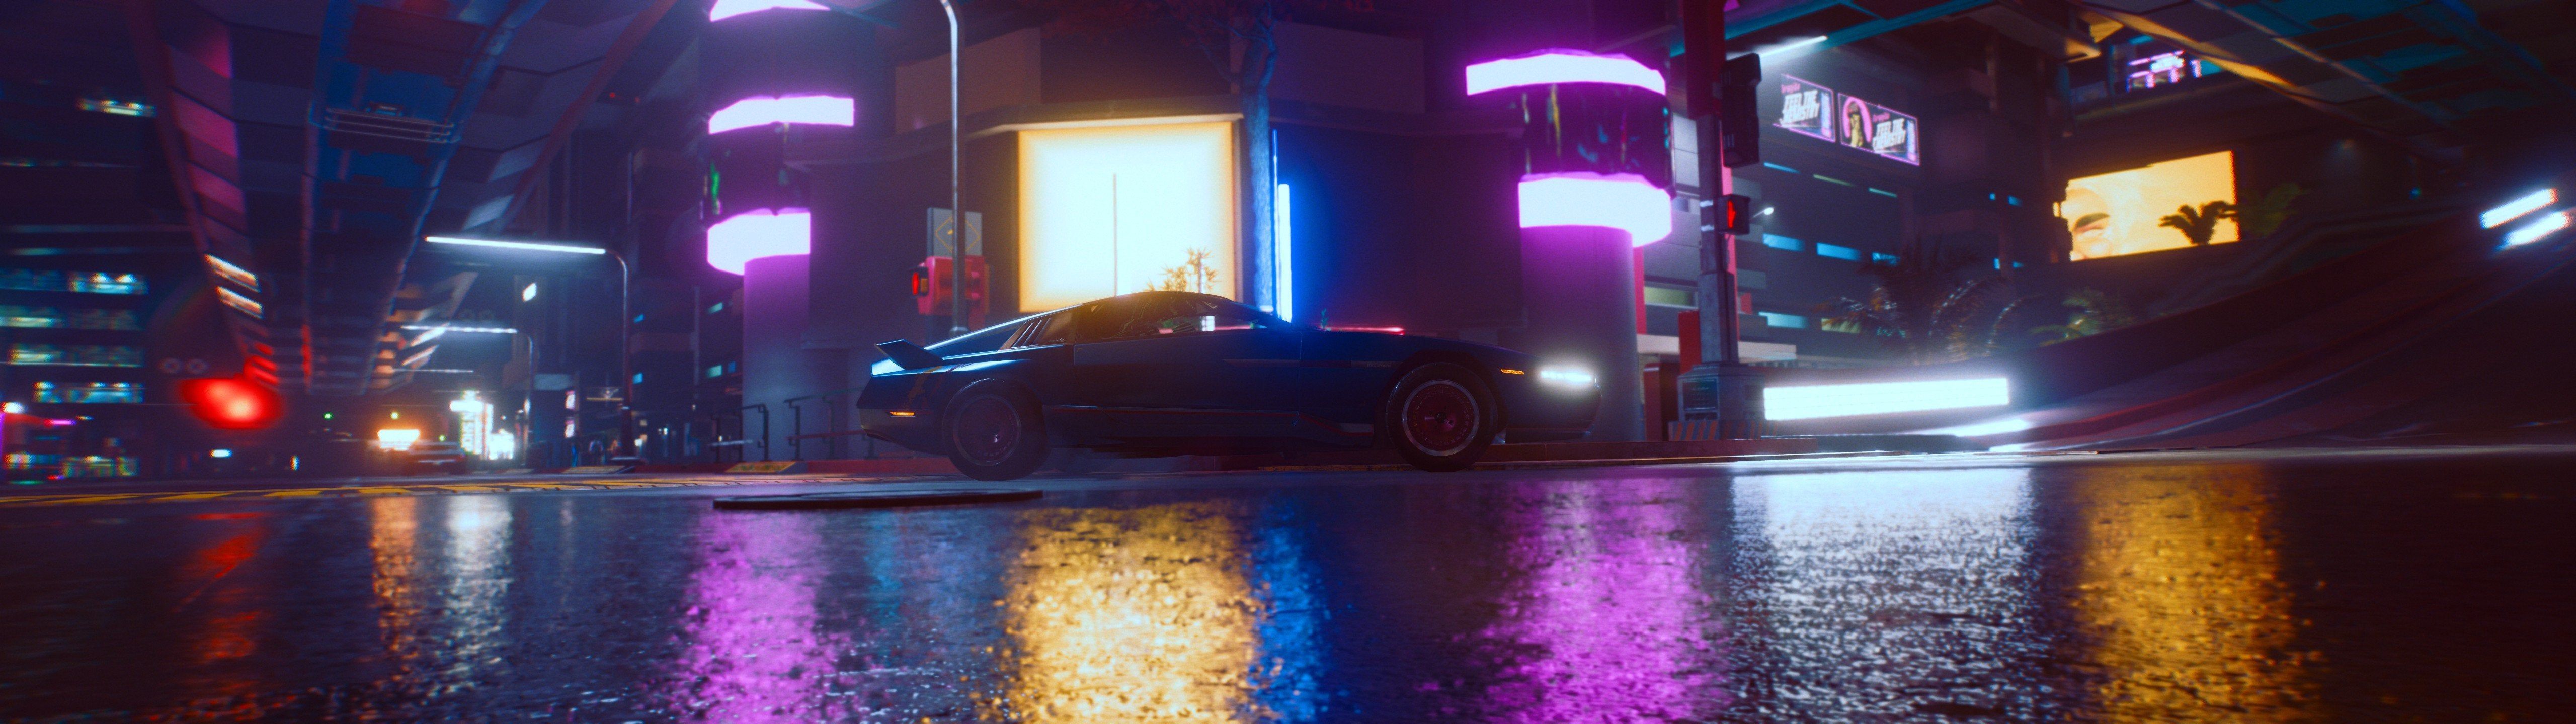 A car driving down the street in neon light - 5120x1440